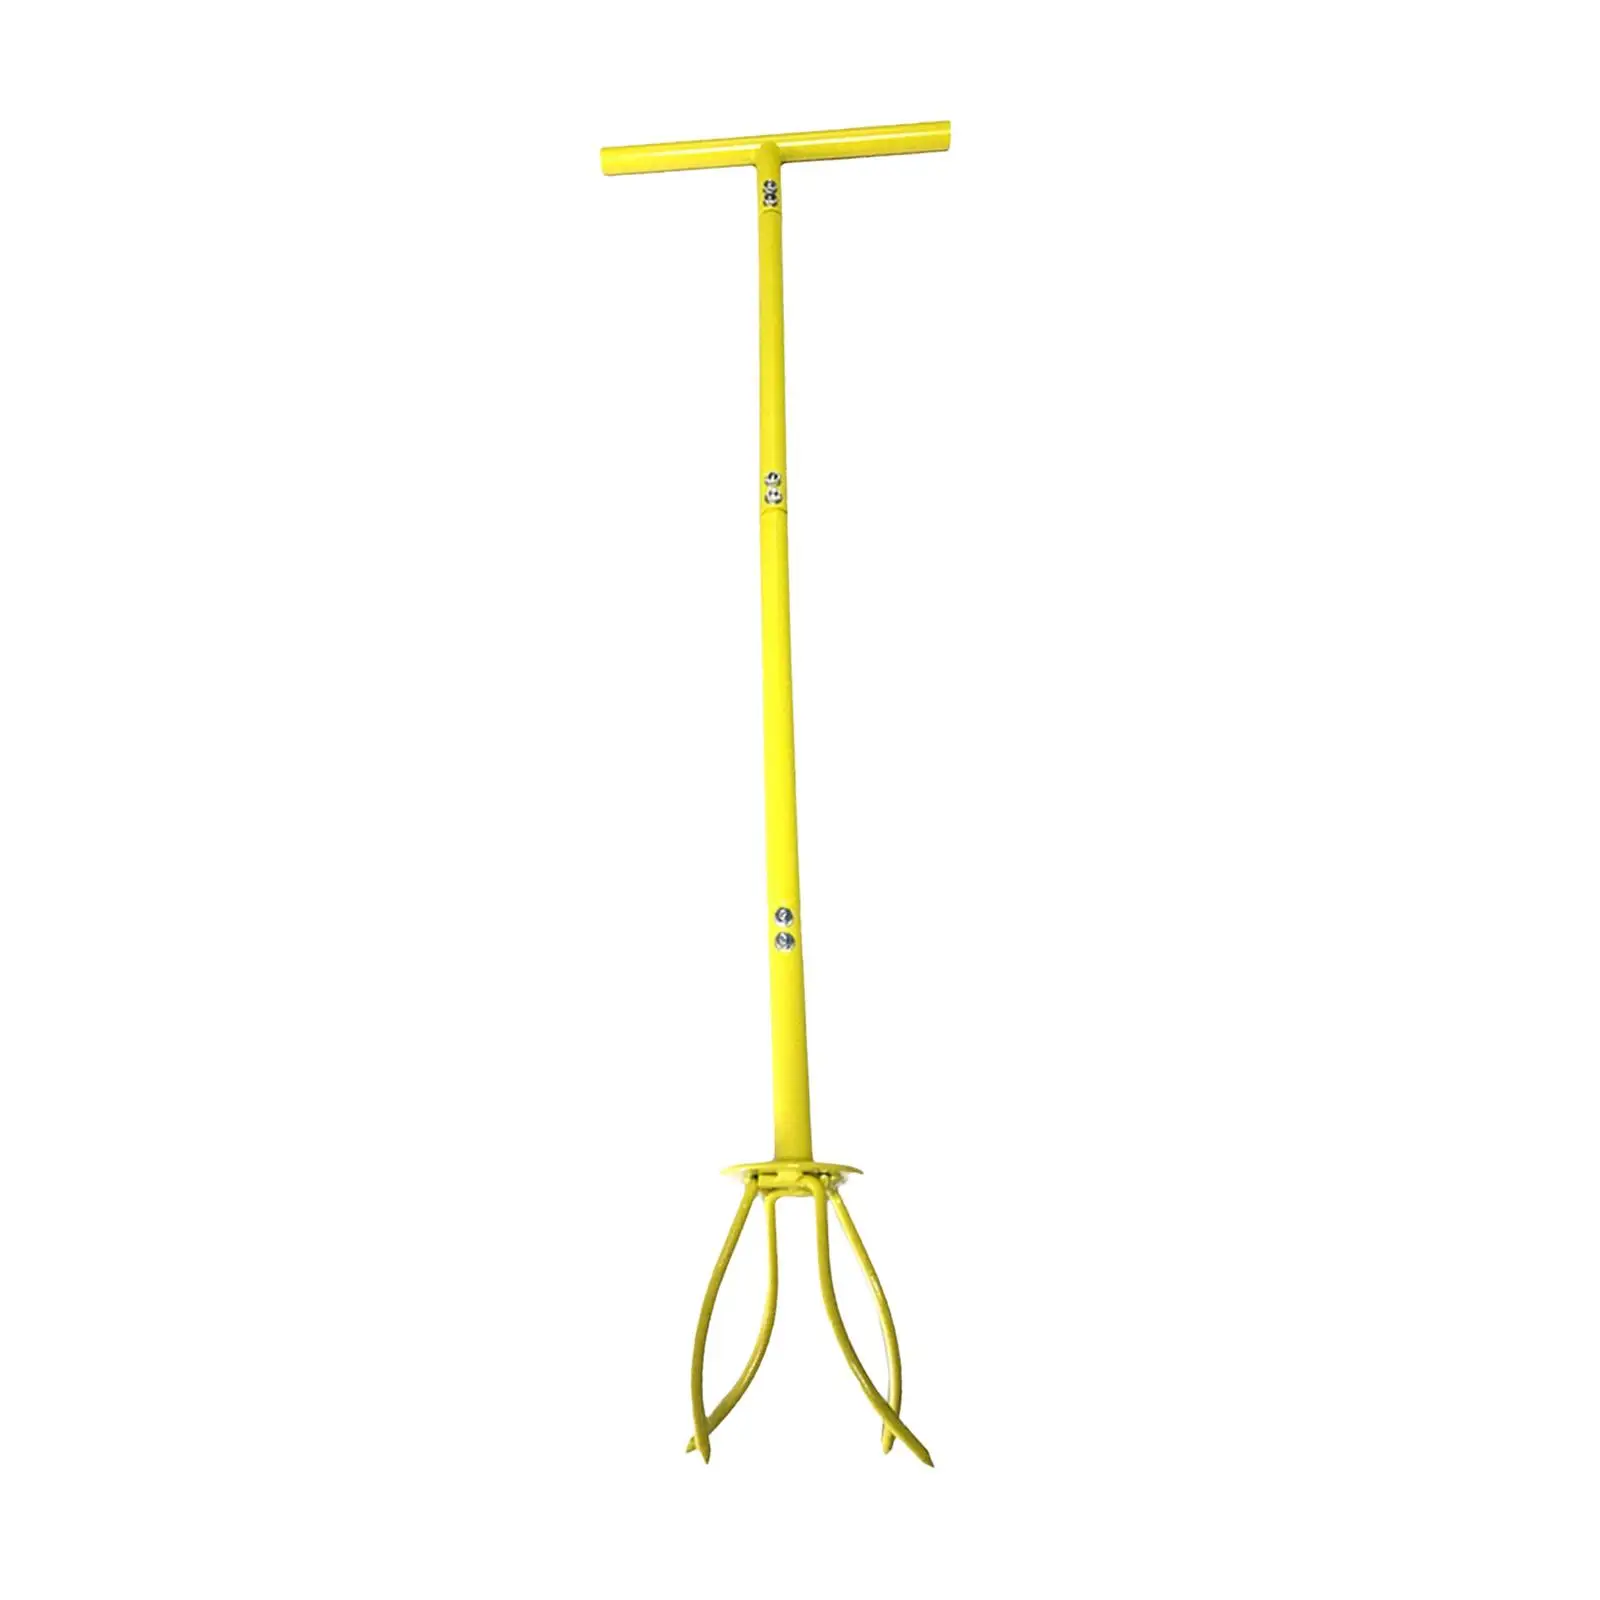 Manual Hand Tiller for Cultivate, Loosen, Aerate Durable Gardening Claw Tool Cultivator Manual Soil Grabber Adjustable Handle